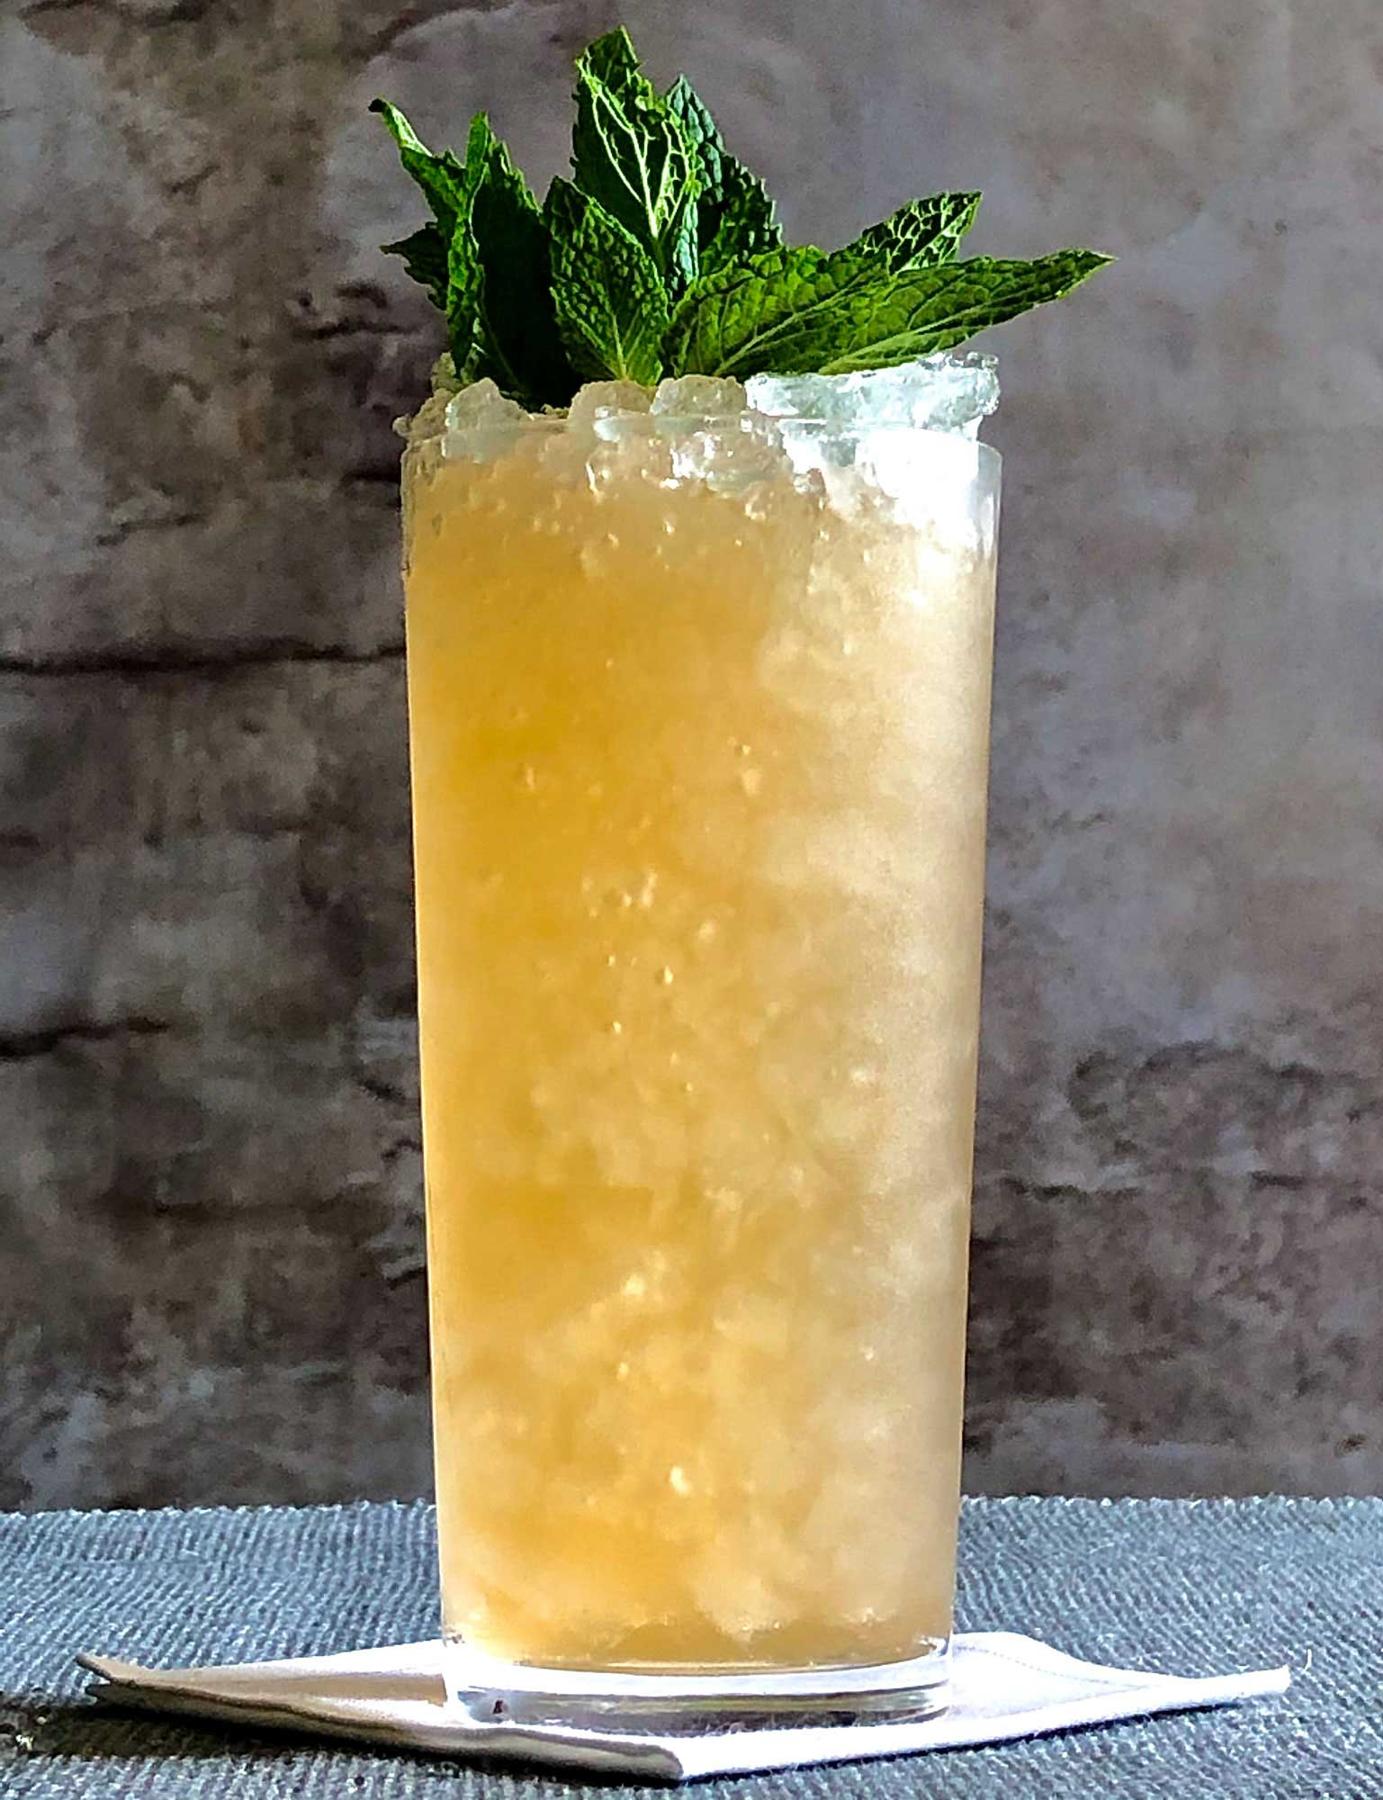 An example of the Velvet Buckaneer, the mixed drink (drink) featuring ginger beer, bourbon whiskey, John D. Taylor’s Velvet Falernum, St. Elizabeth Allspice Dram, lime juice, aromatic bitters, and mint; photo by Lee Edwards